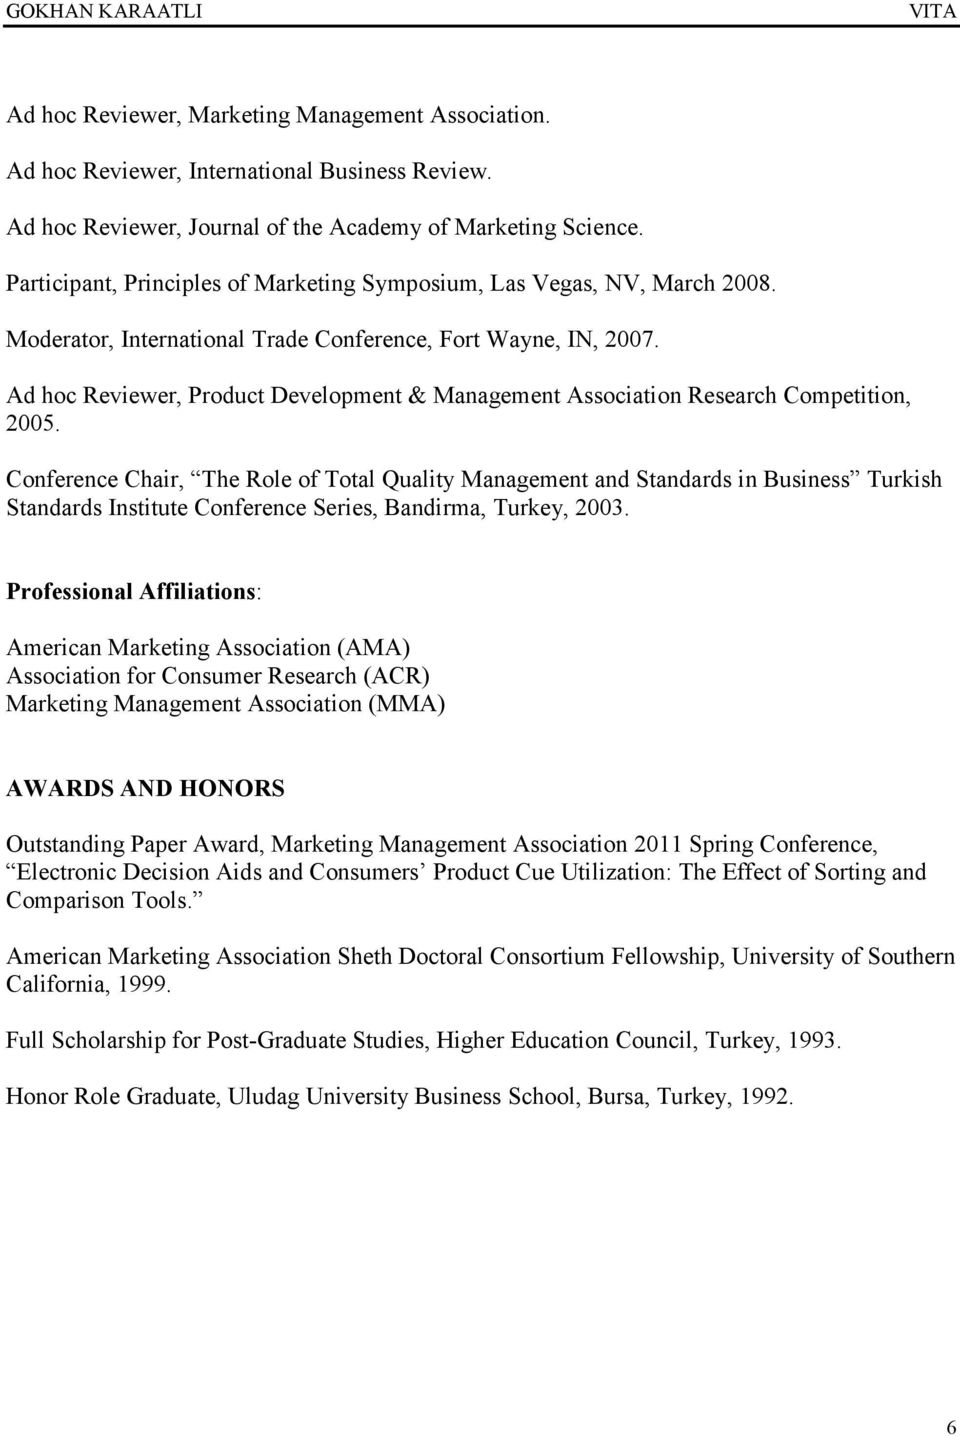 Ad hoc Reviewer, Product Development & Management Association Research Competition, 2005.